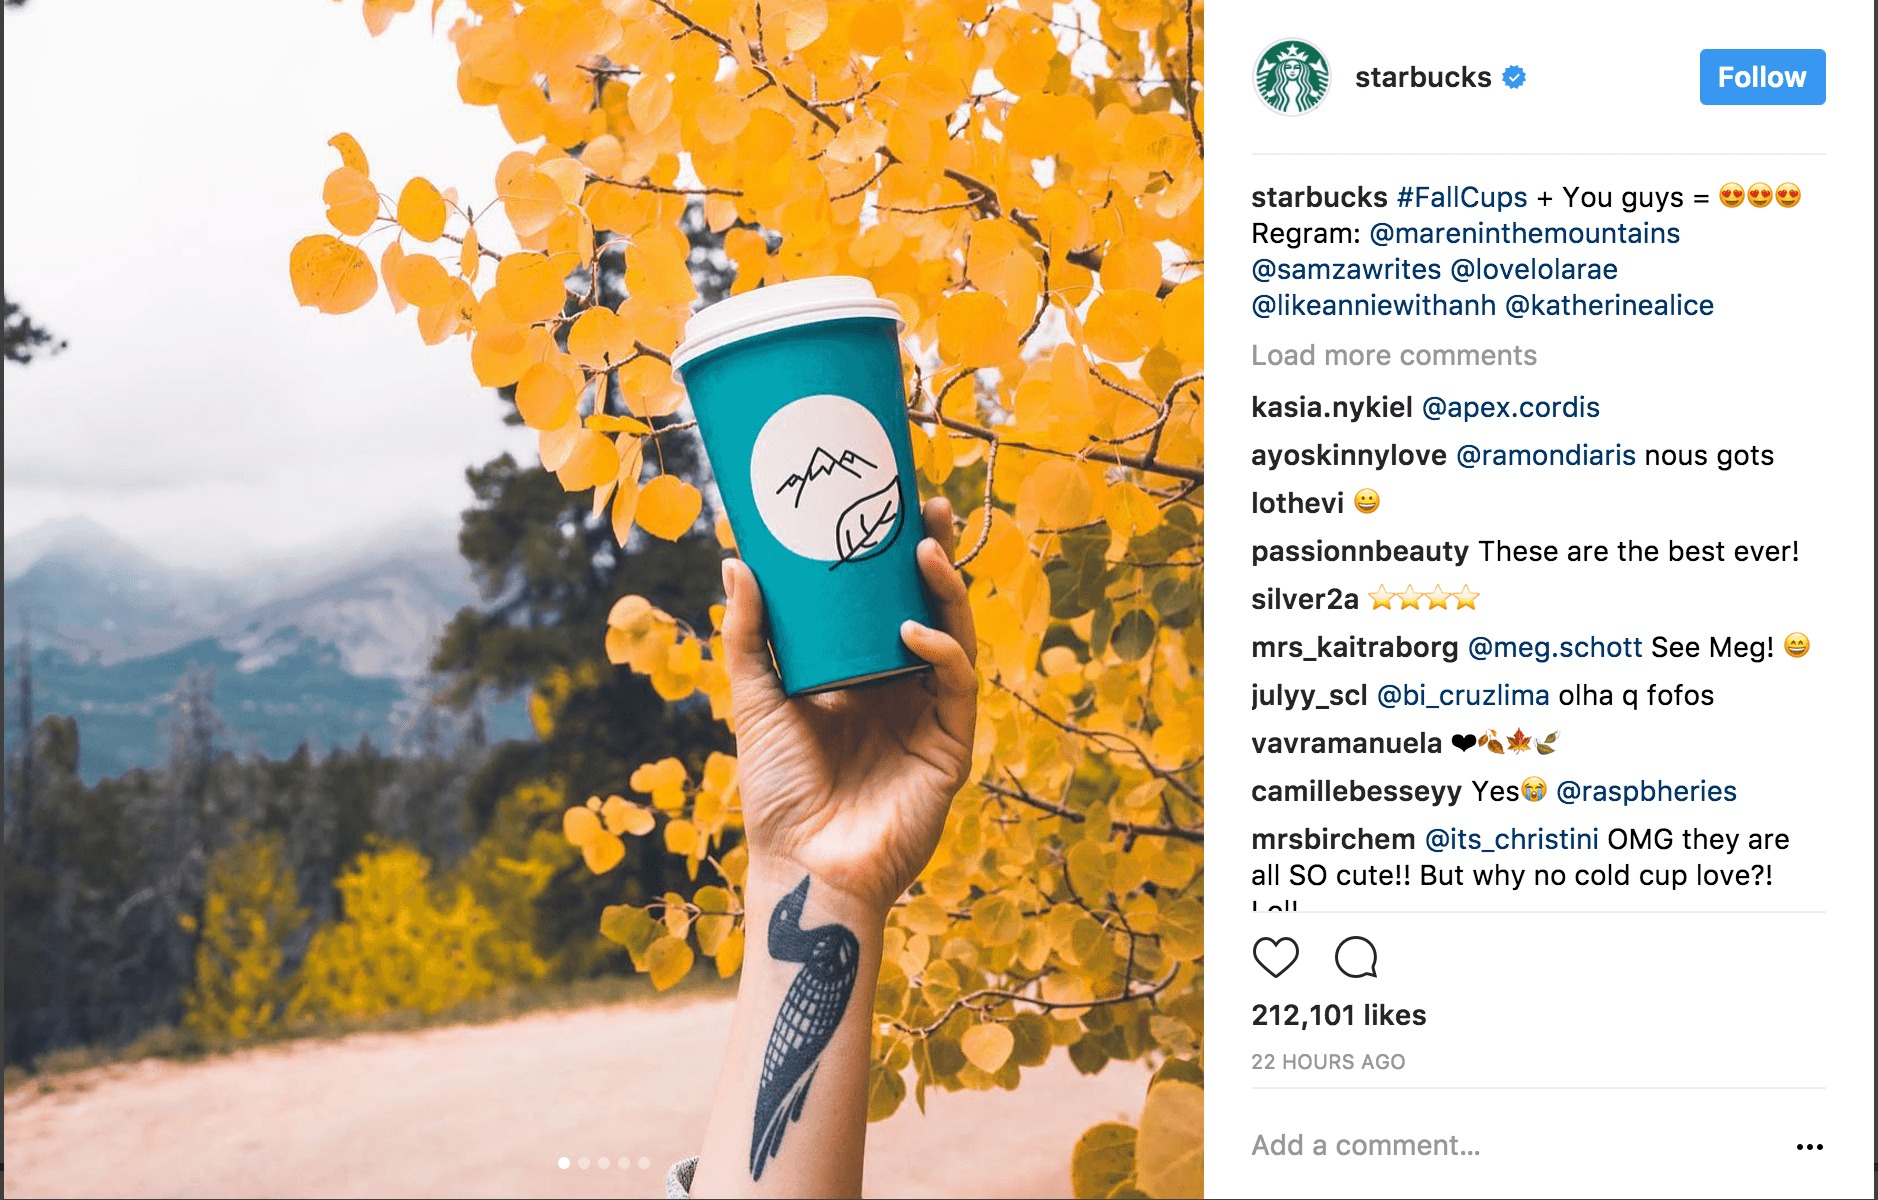 Starbucks instagram screen grab - an example of creating an authentic user experience